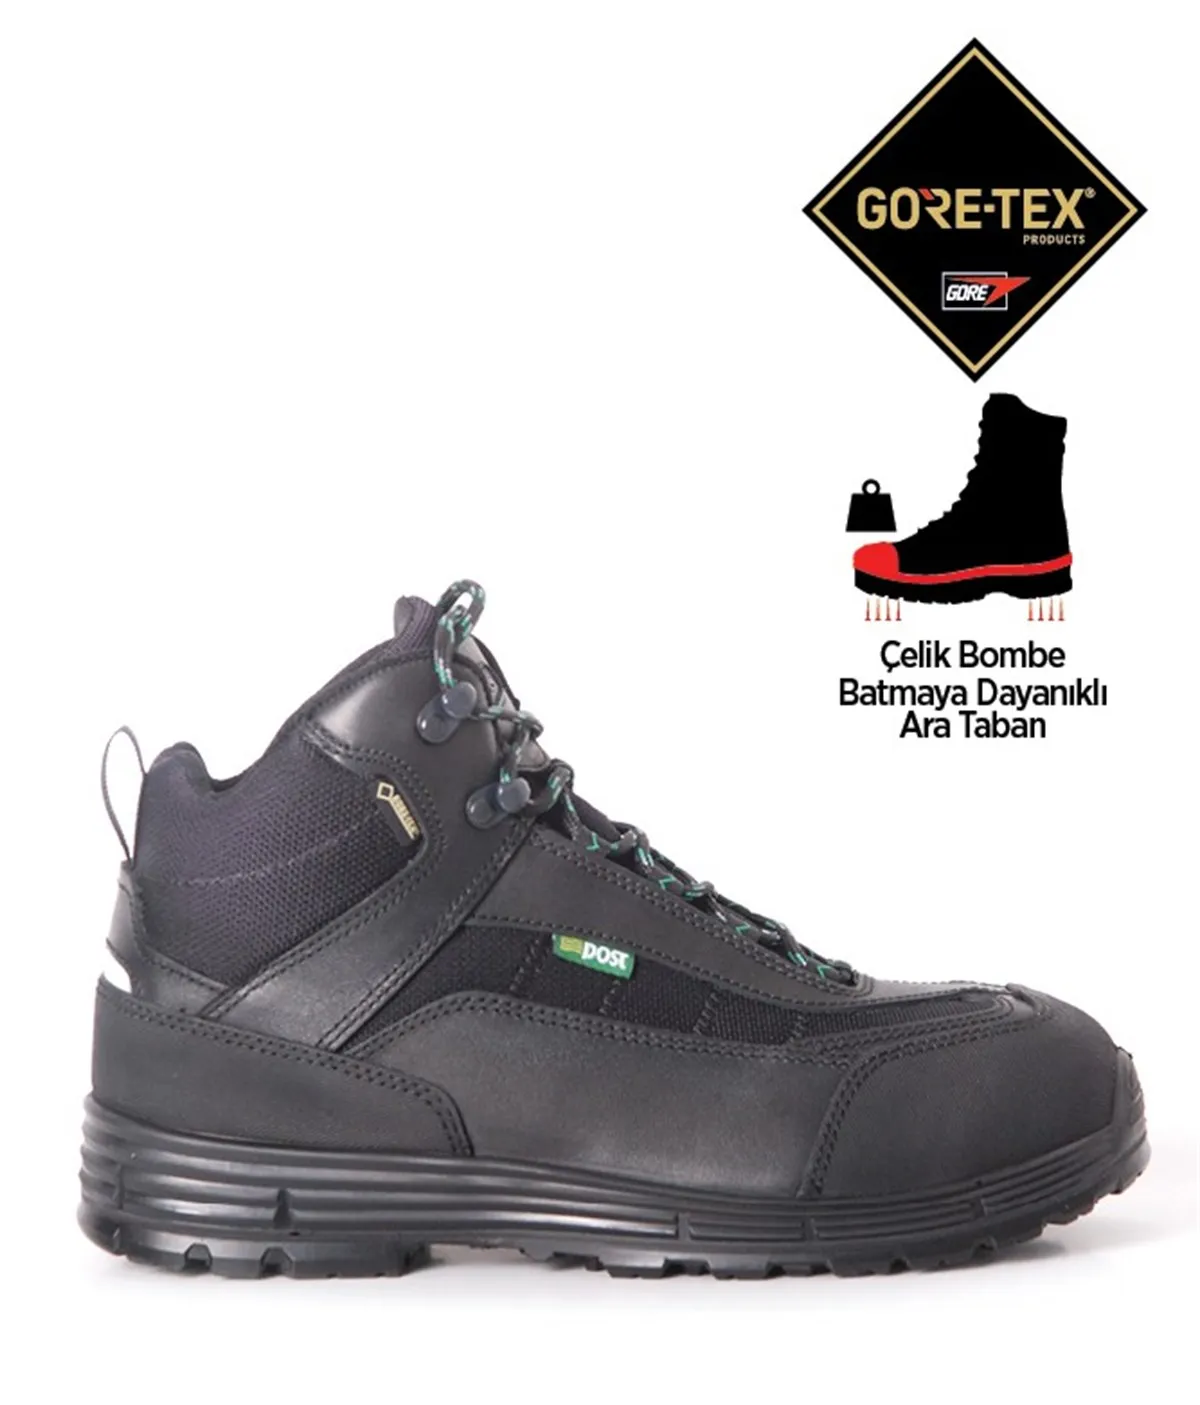 

YDS Hpam 1303 GTX Work Safety Boots, Inner Lining: Gore-tex lining. Highly breathable. Durable and 100% WATERPROOF